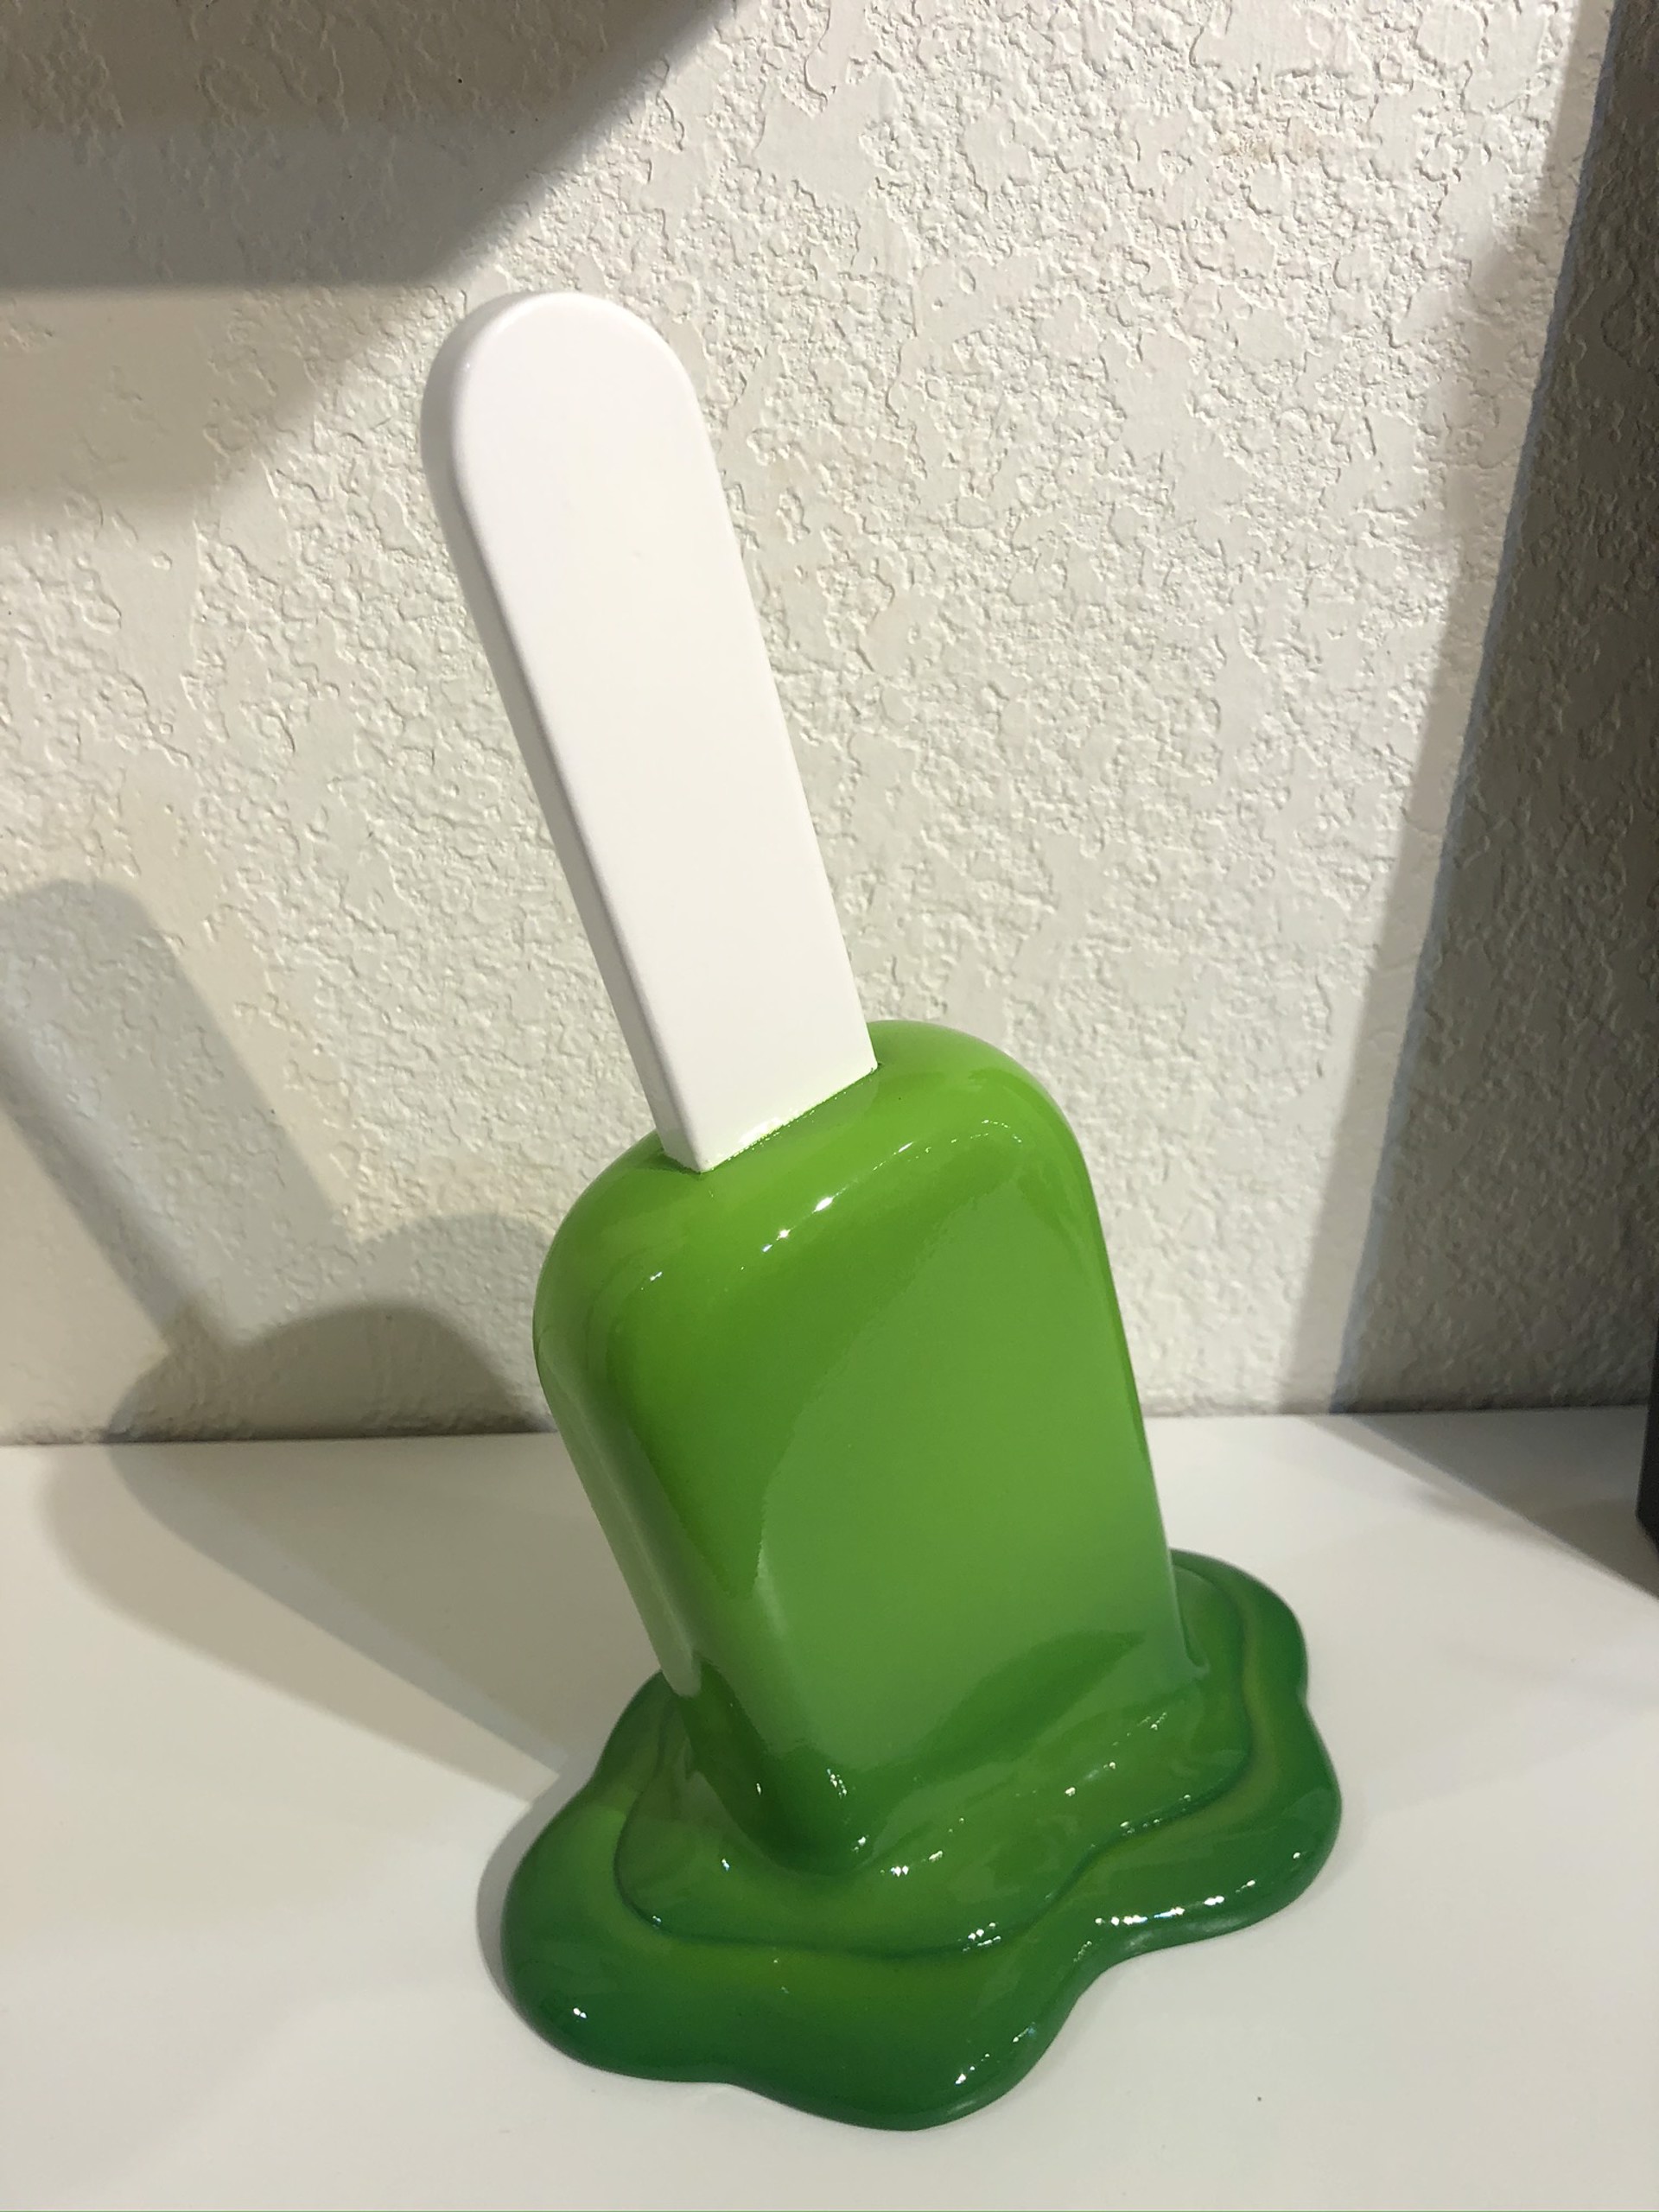 The Sweet Life, Small Popsicle, 12 Inches, Green Ombre by Popsicles  by Elena Bulatova